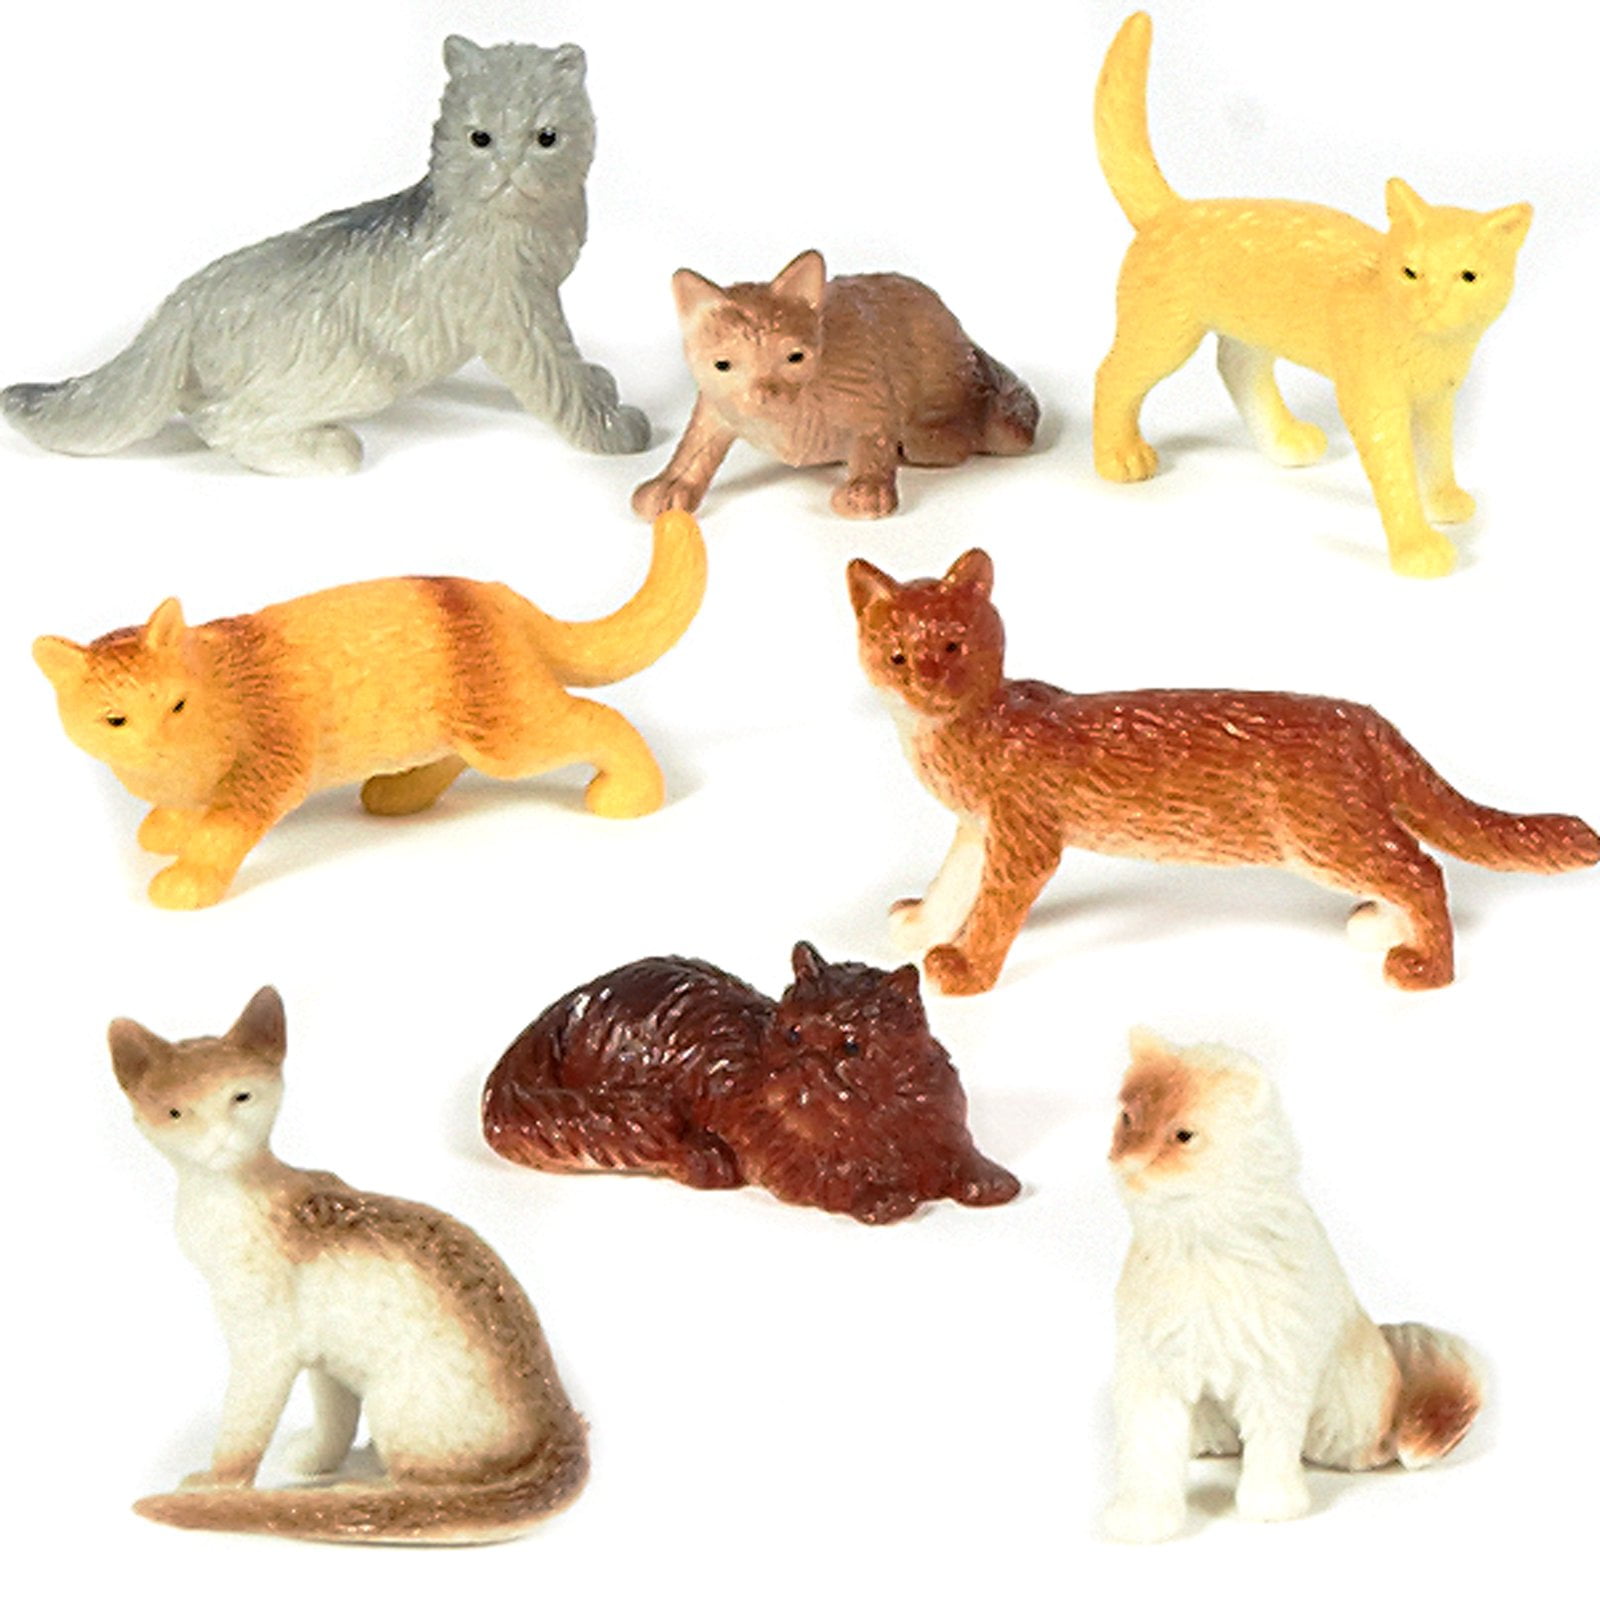 Large Cats & Dogs Assorted Animal Toy Figures Bundle 4 Inches Bulk - 24 Pieces 